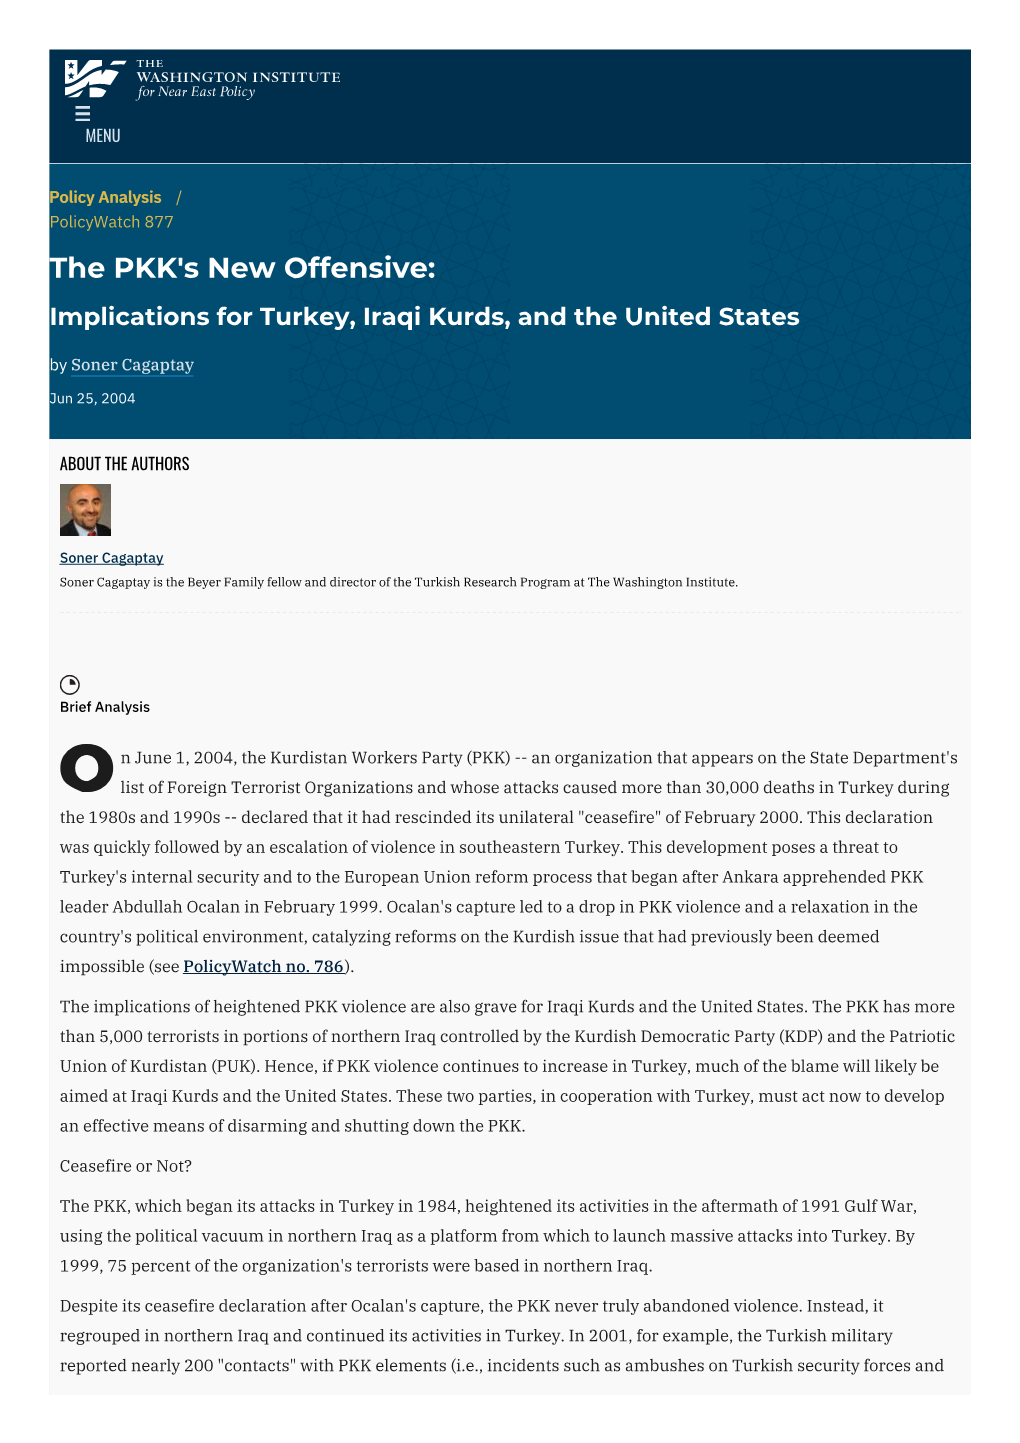 The PKK's New Offensive: Implications for Turkey, Iraqi Kurds, and the United States by Soner Cagaptay